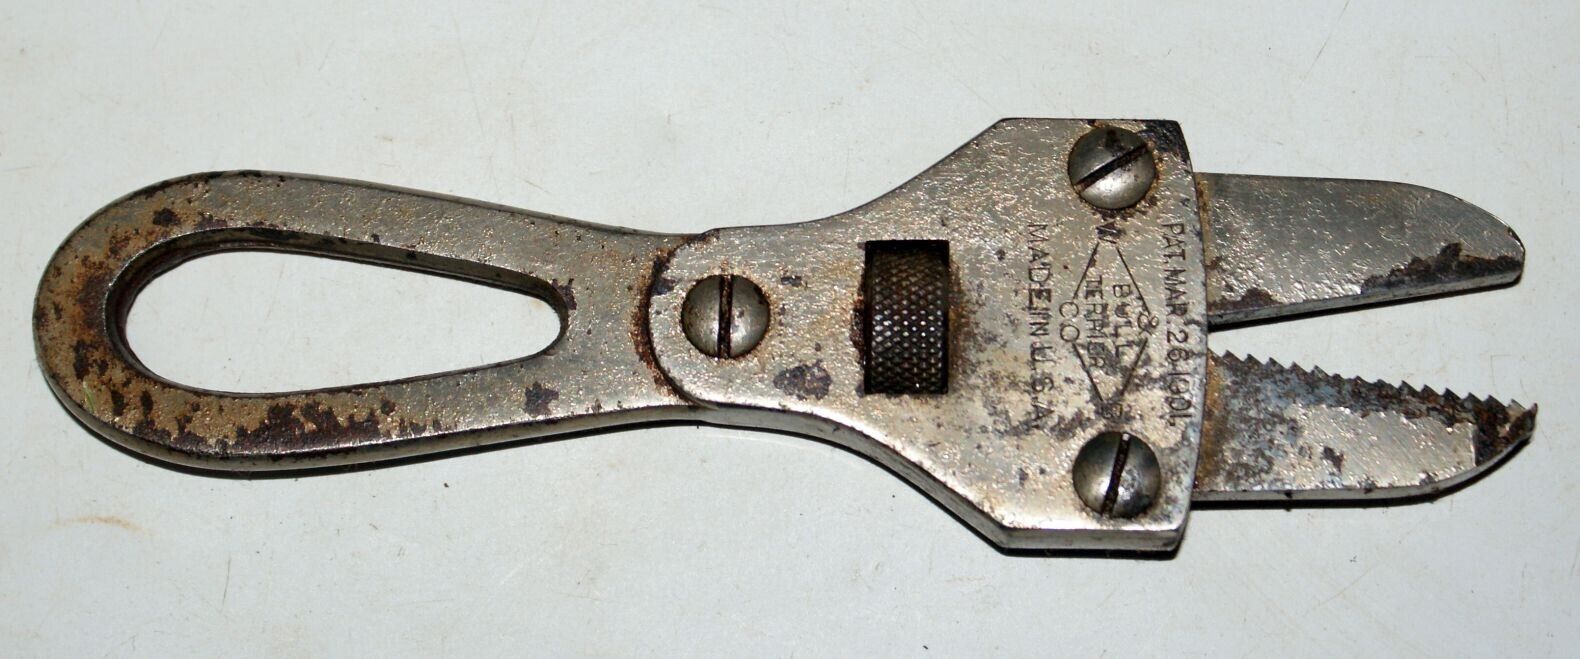 Old WHITMAN & BARNES BULL TERRIER Patented Adjustable alligator Wrench Tool 1901